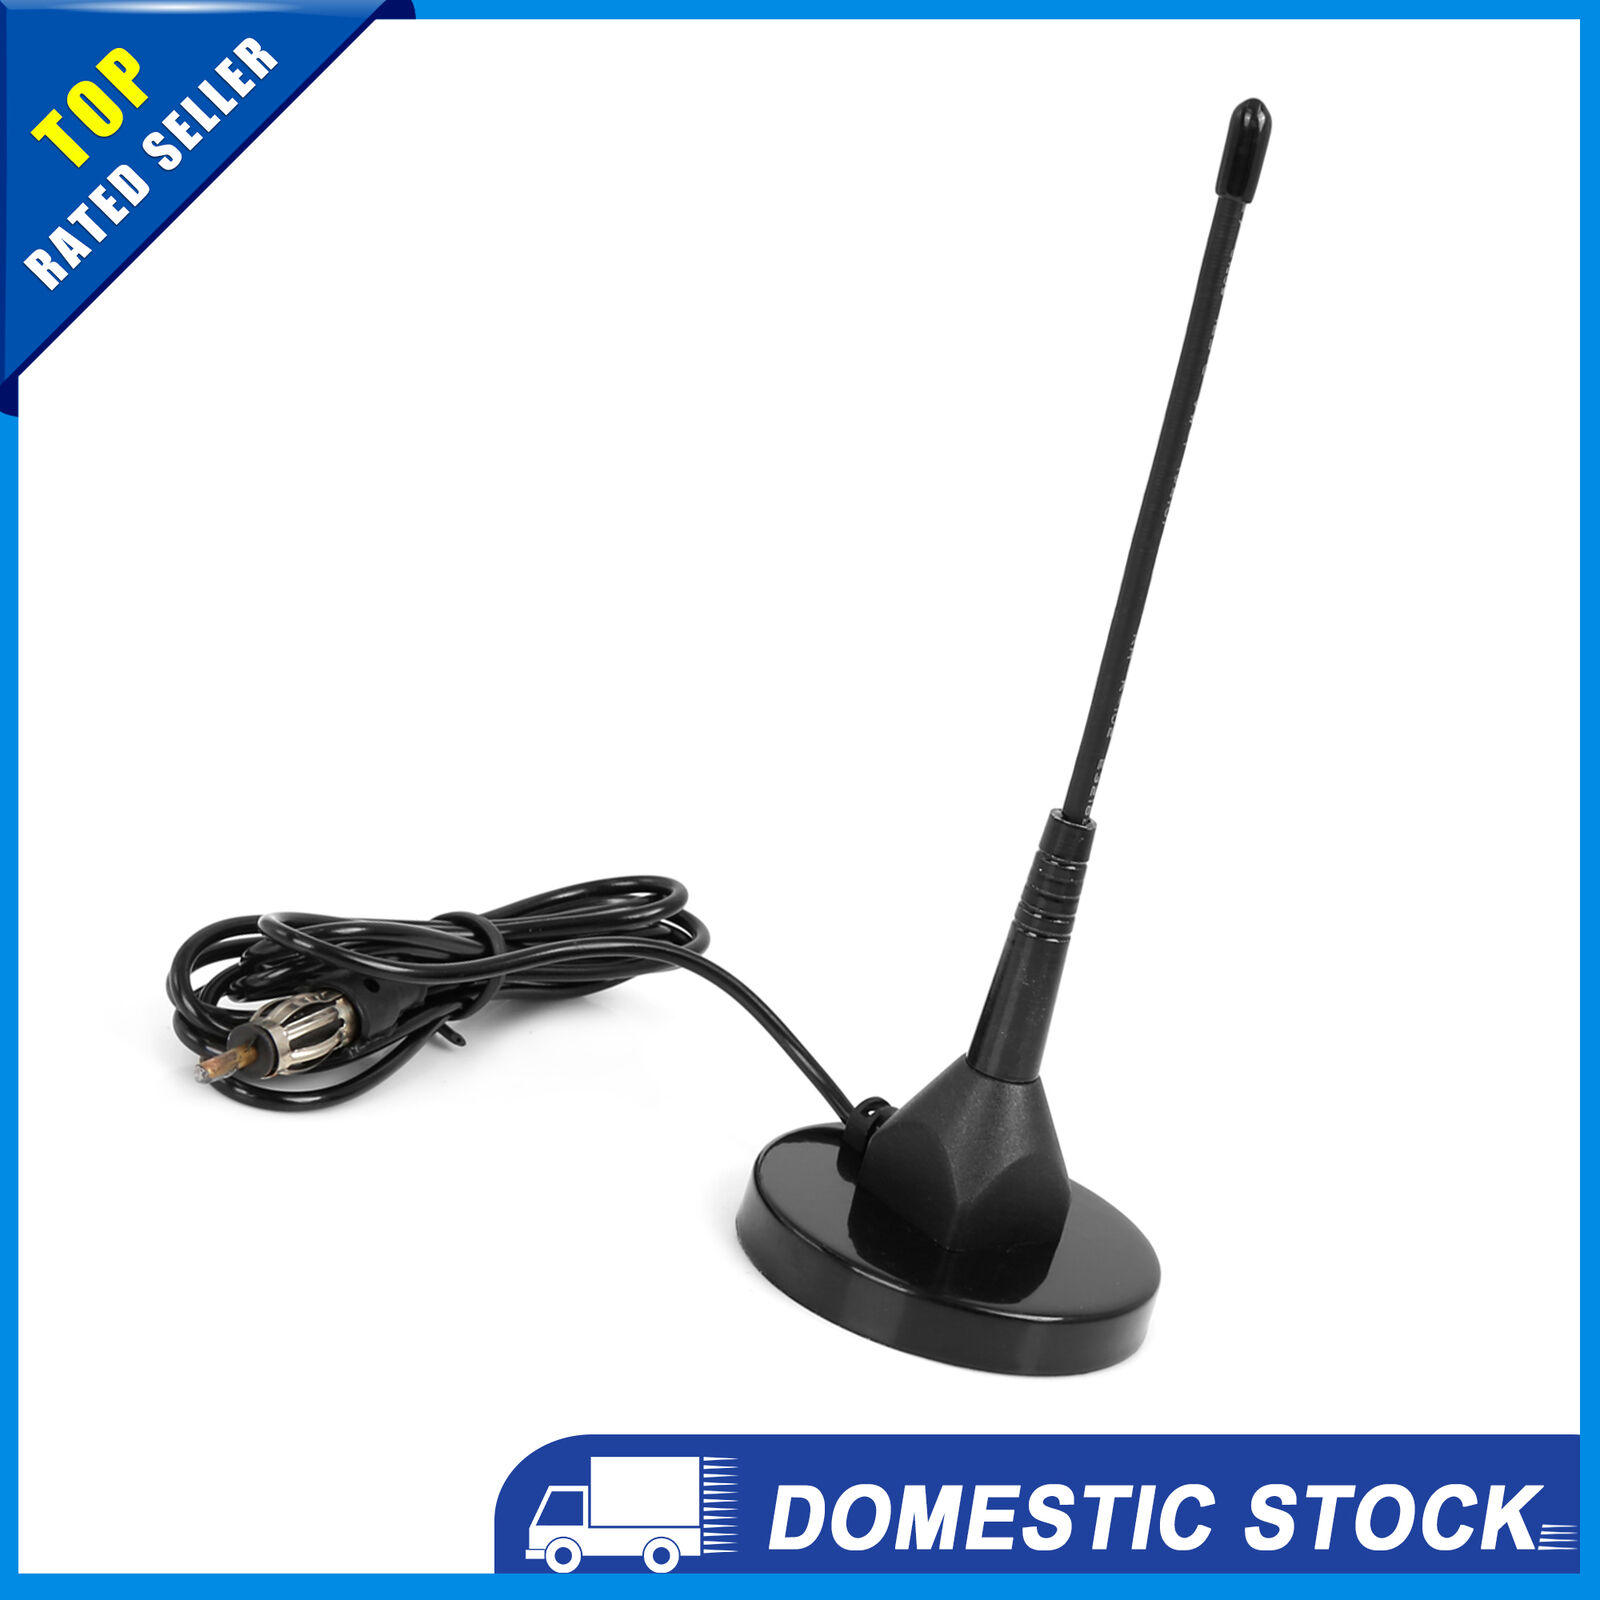 Pack of 1 Universal Car Vehicle Magnetic Base Signal Radio FM/AM Antenna Aerial